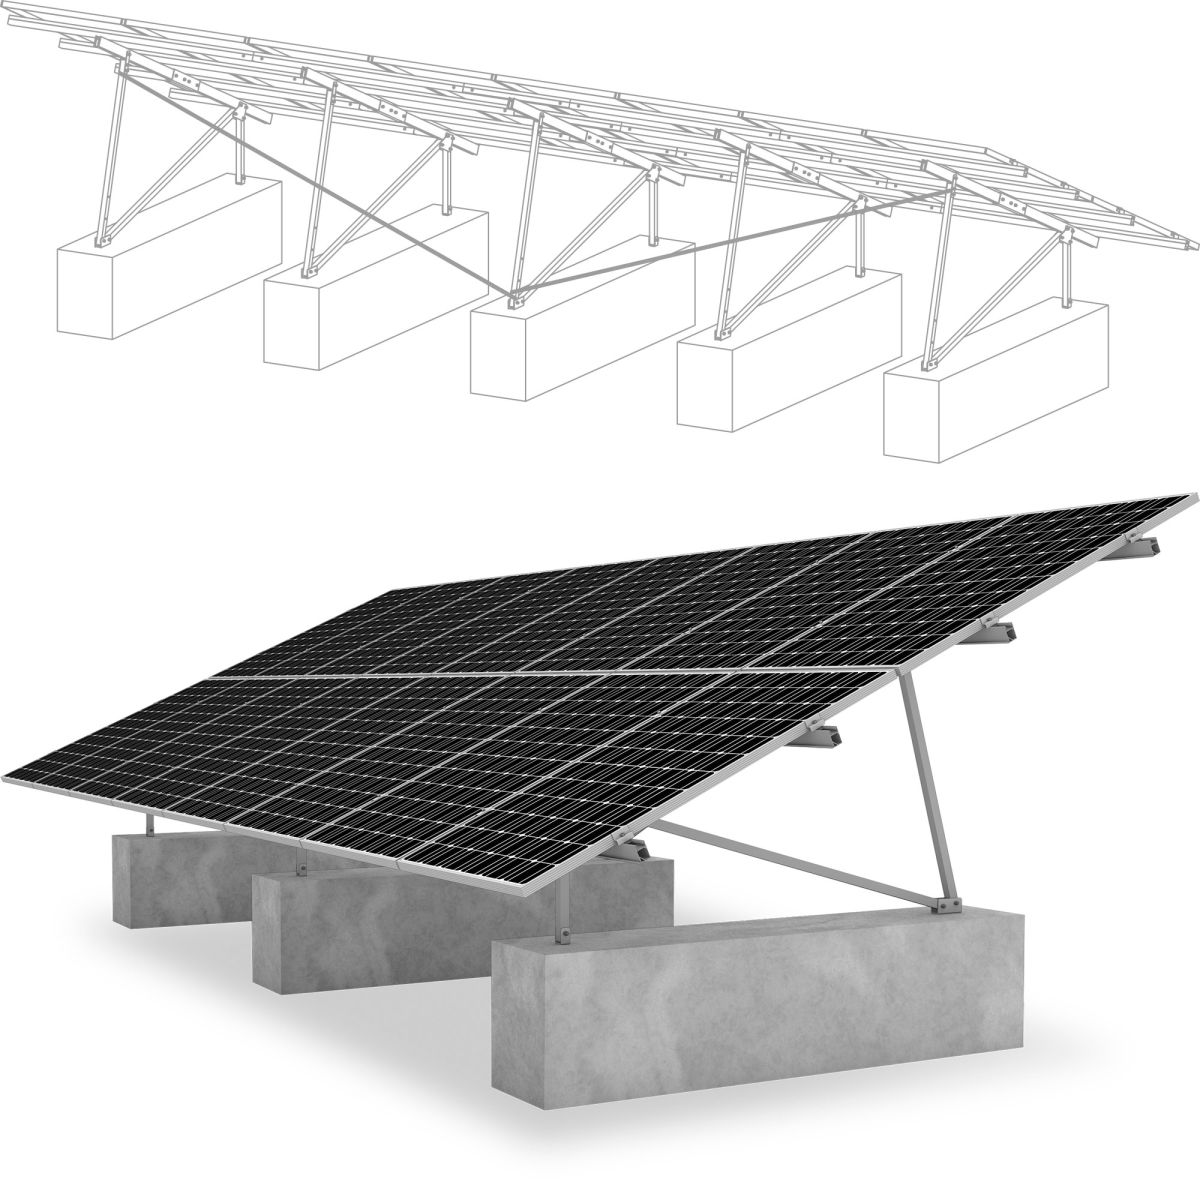 Ground-mount mounting system - 3 - Jinko solar - solar / for photovoltaic  panels